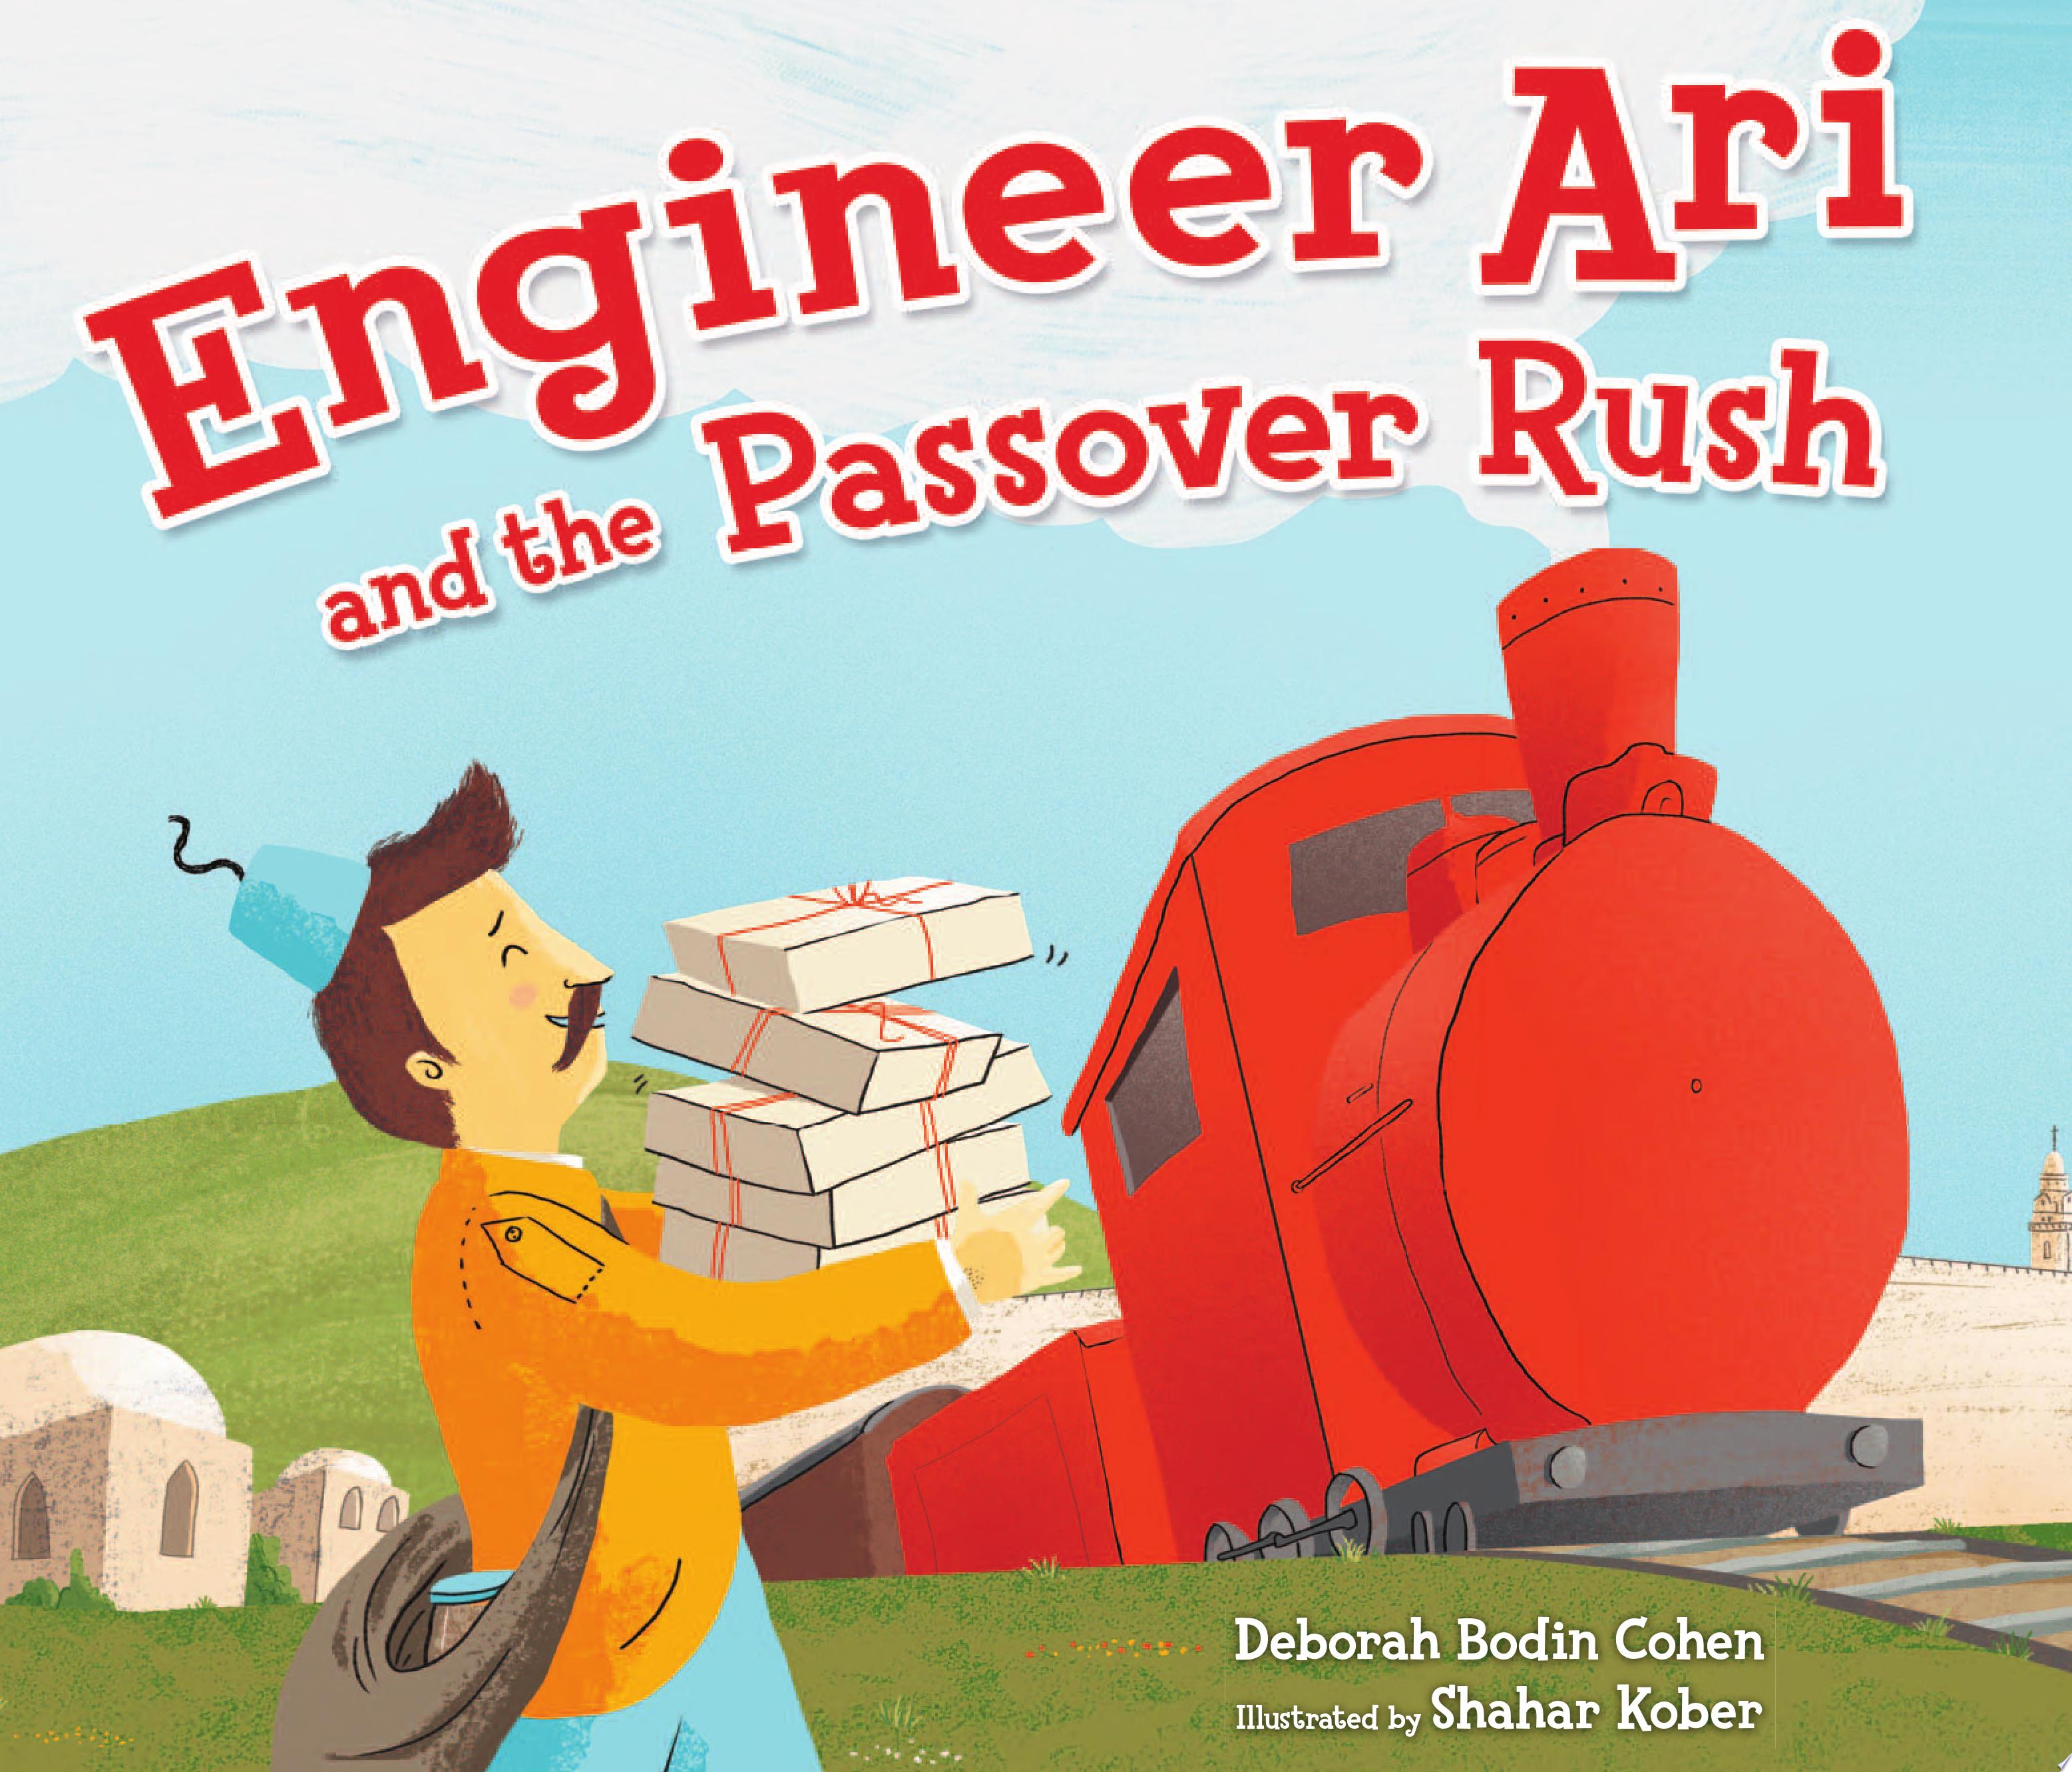 Image for "Engineer Ari and the Passover Rush"